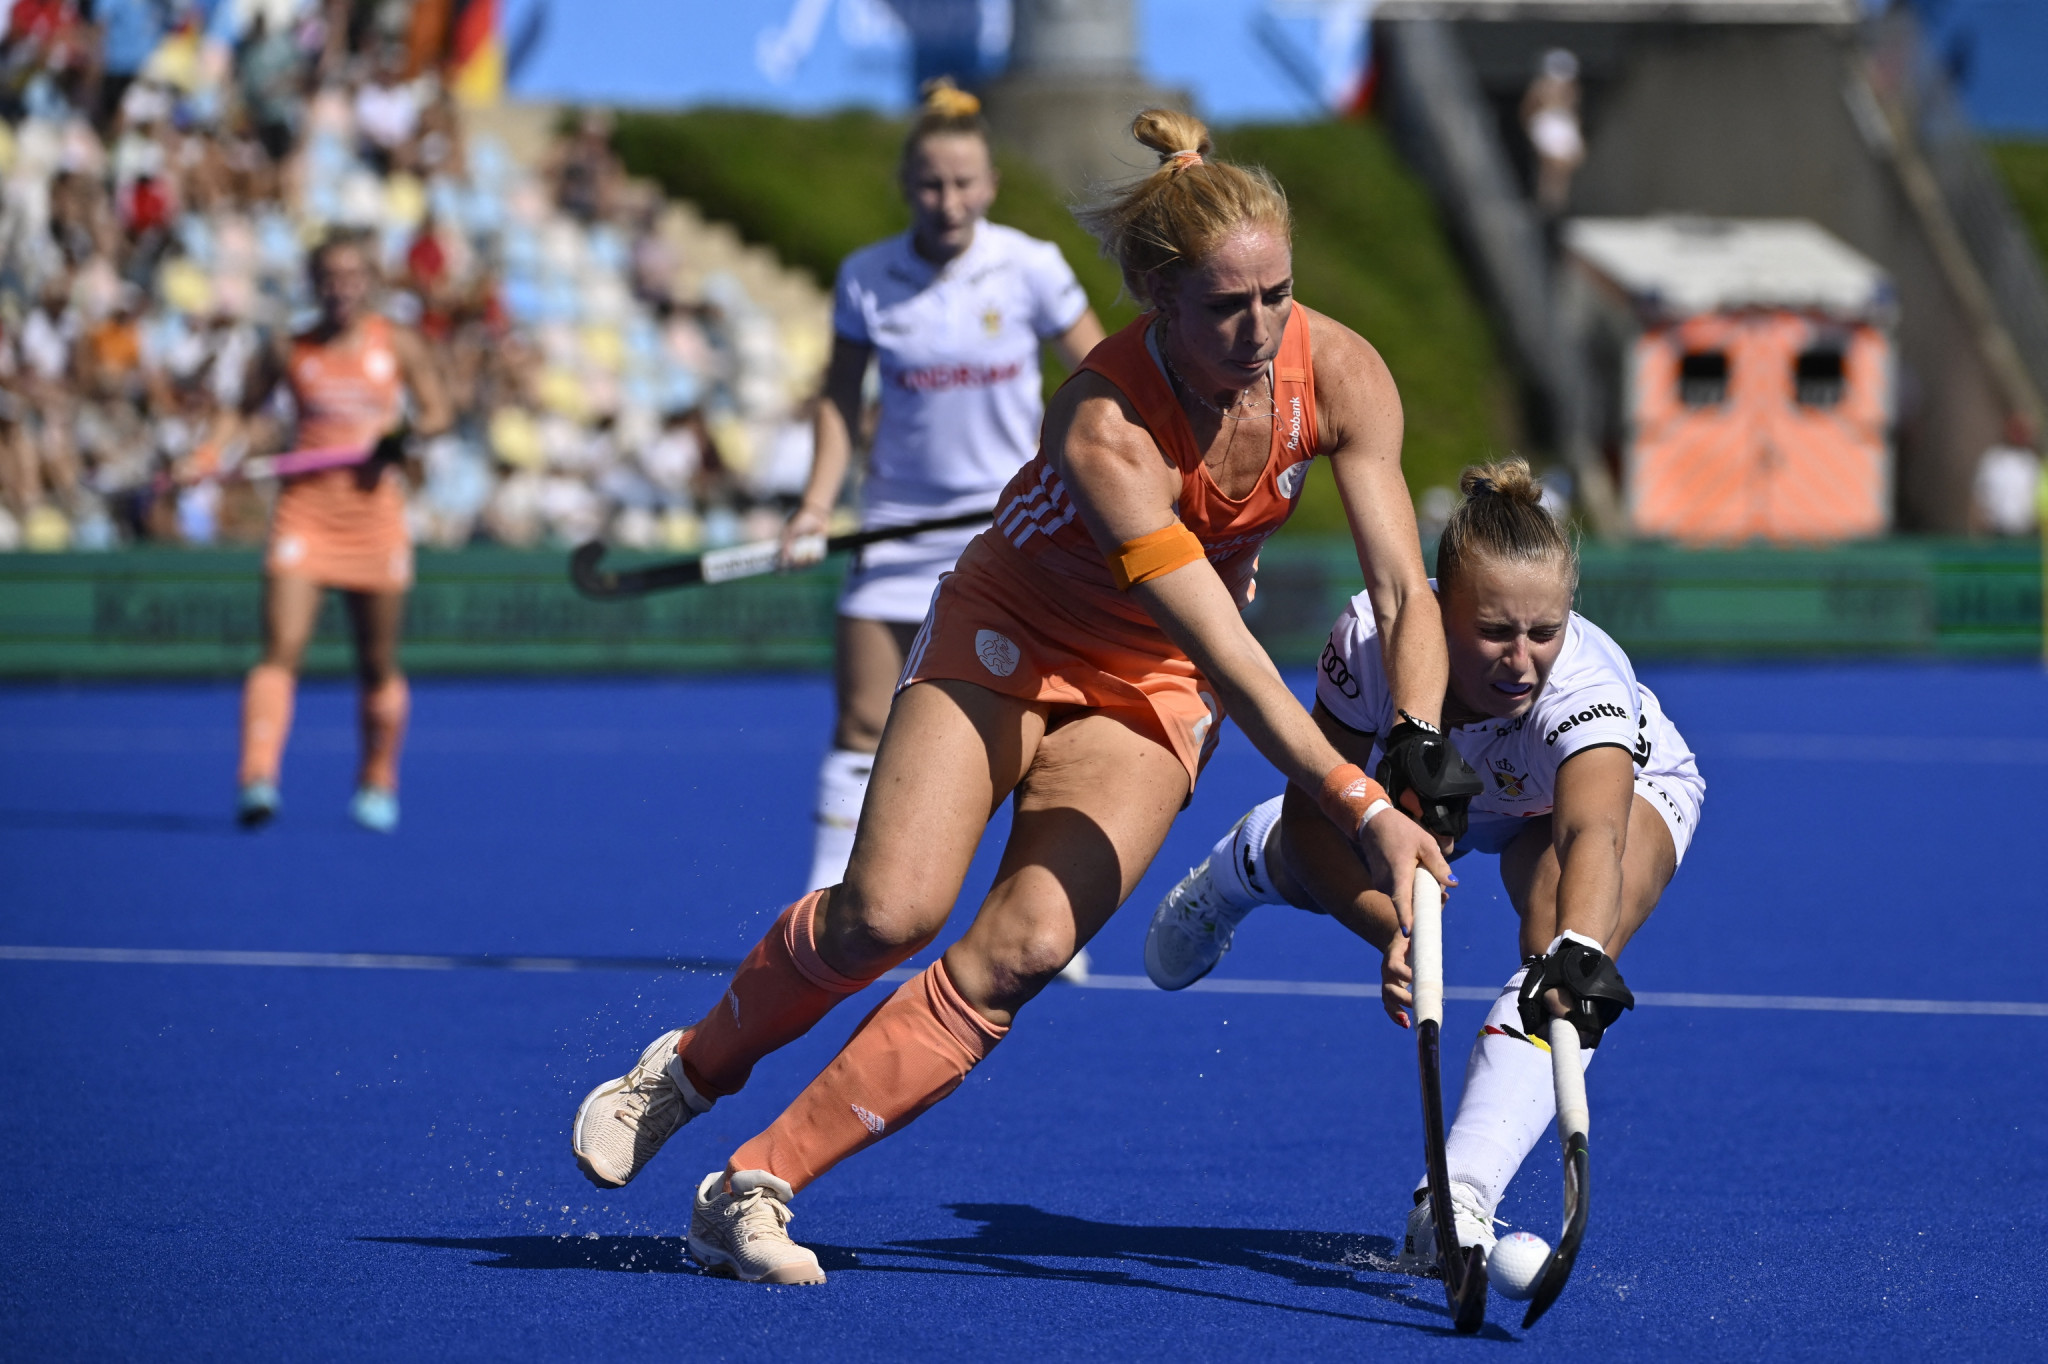 The Netherlands could meet Germany in the women's final as both sides advanced to opposite sides of the semi-finals ©Getty Images